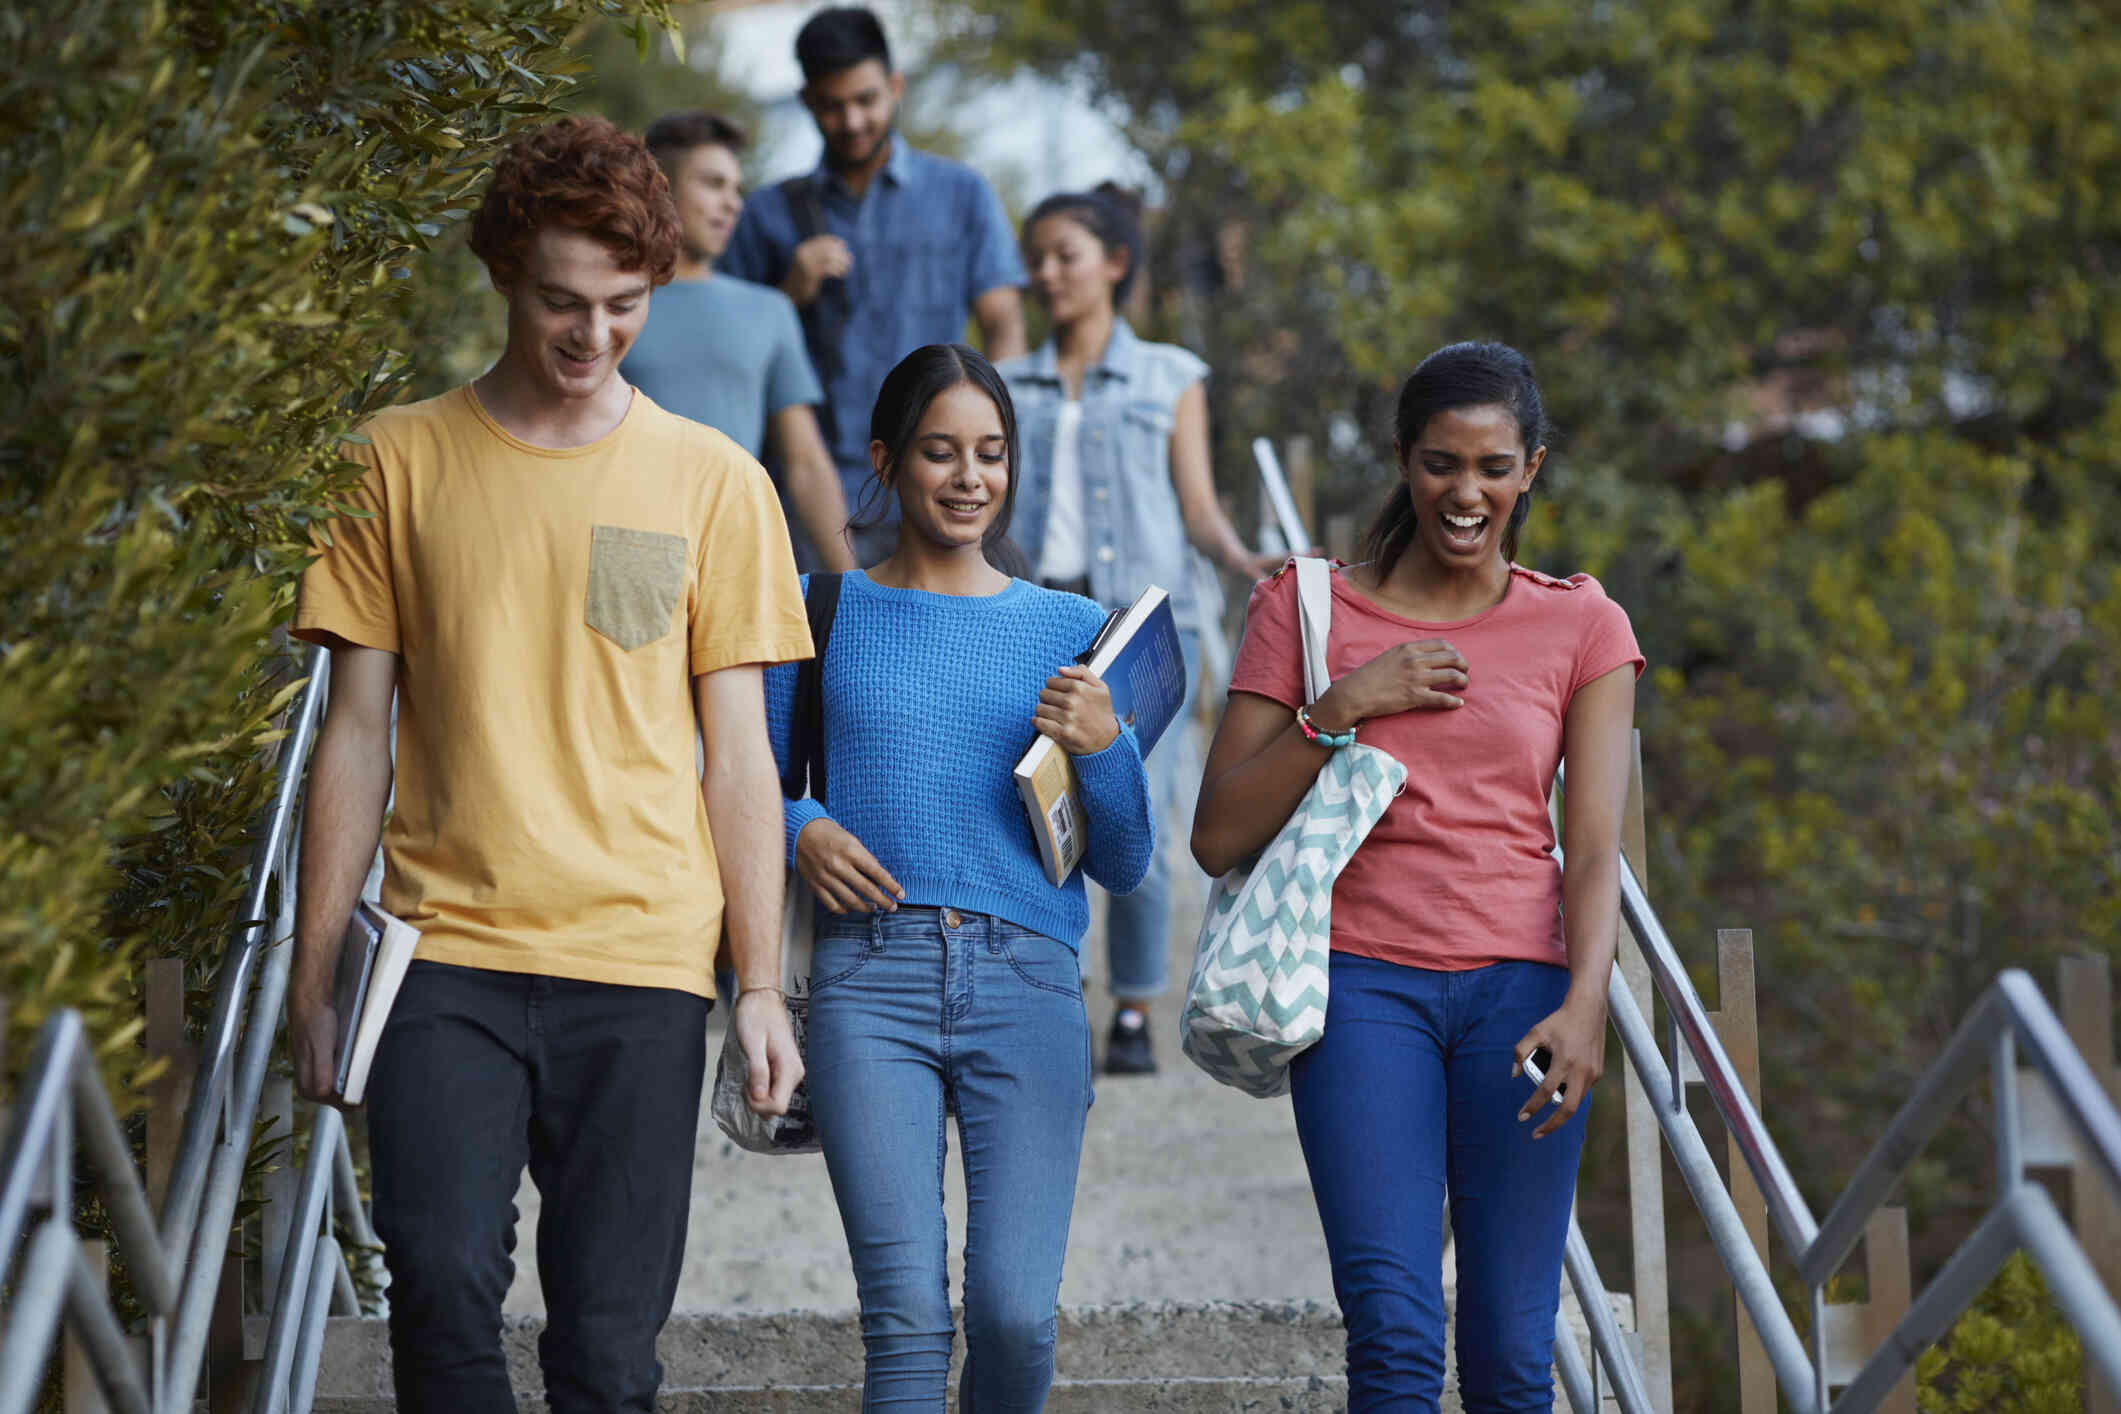 A group of teenagers walk together down a flight of outdoor steps on a sunny day while smiling and chatting.